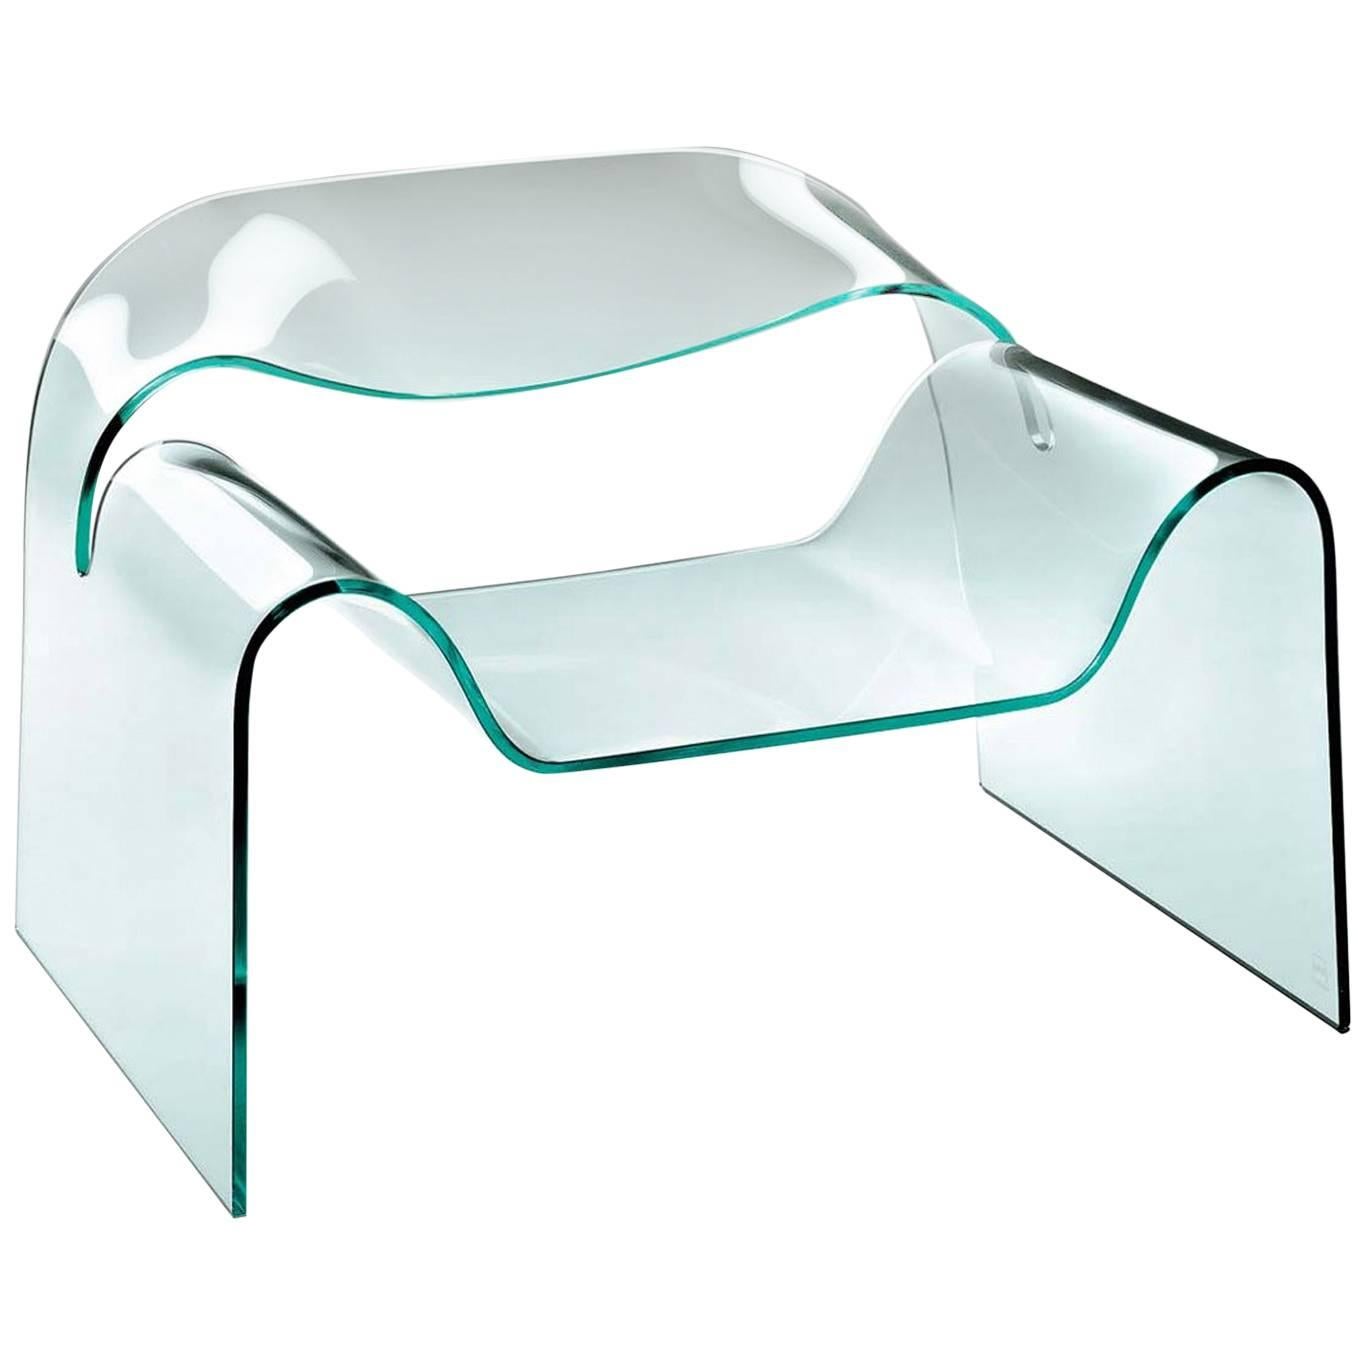 Air Armchair Casted in One Slab of Curved Clear Glass